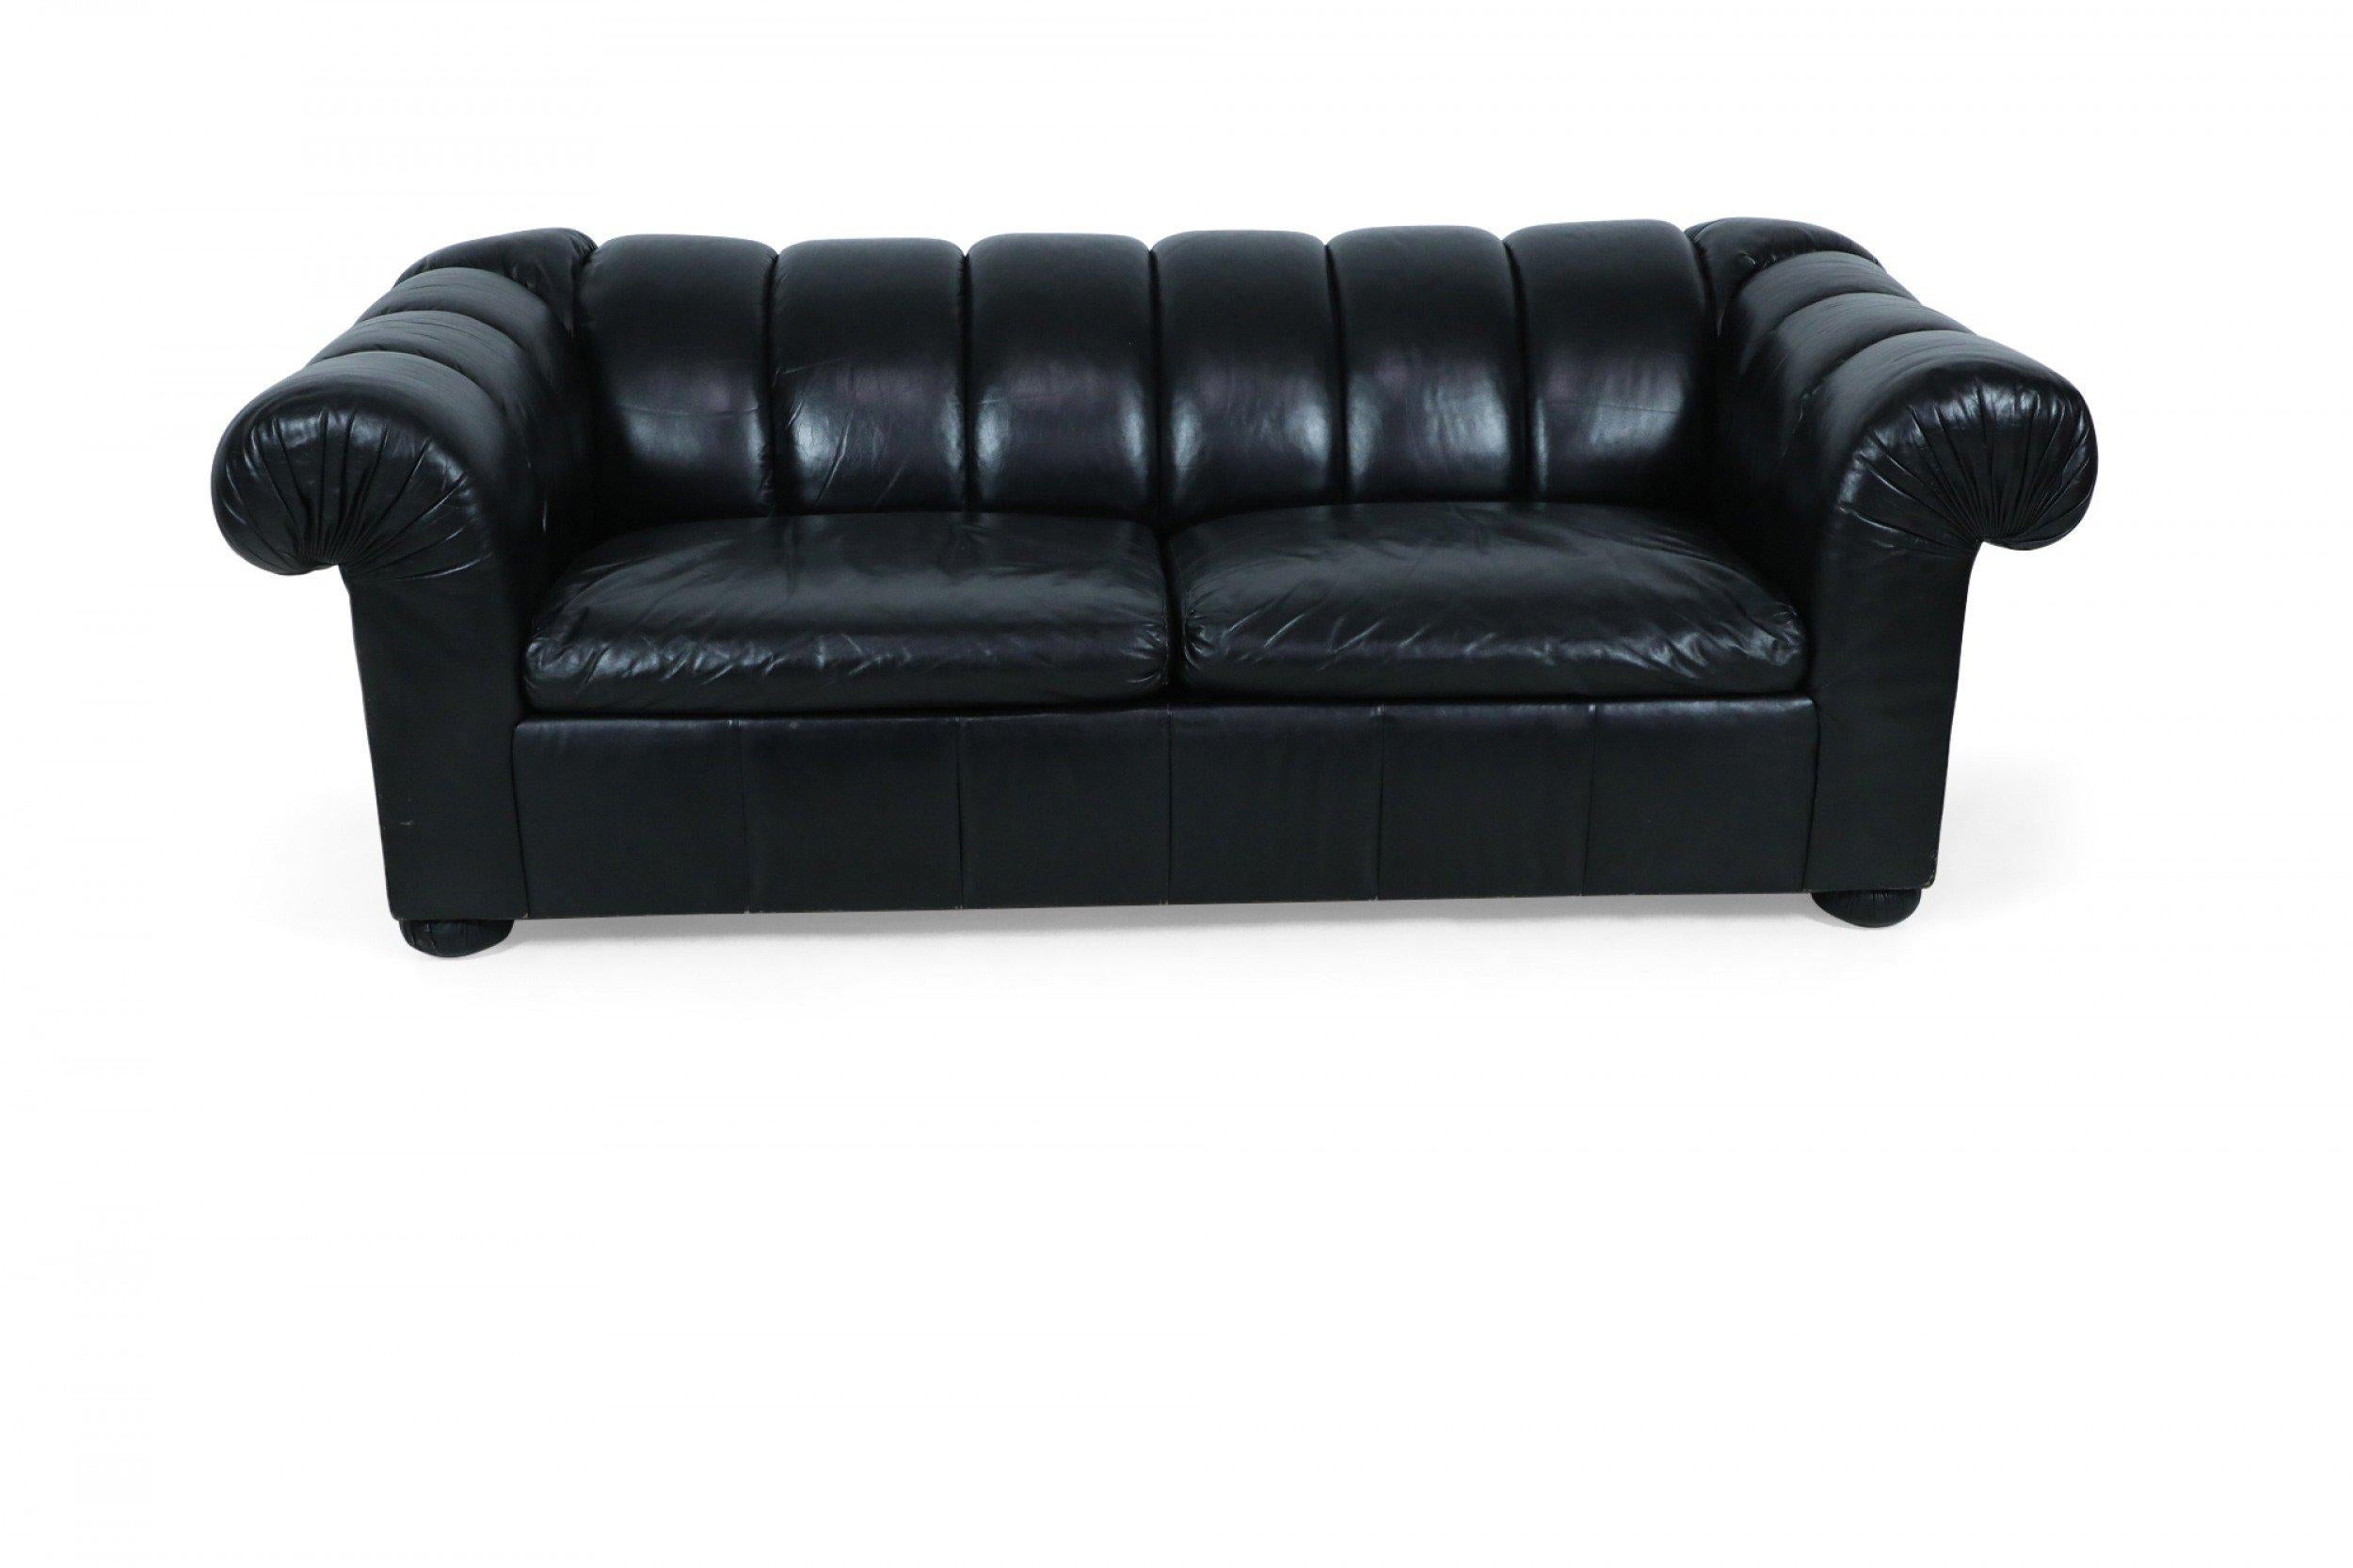 Upholstery Modern Black Leather Channeled Sofa with Pull Out Bed For Sale